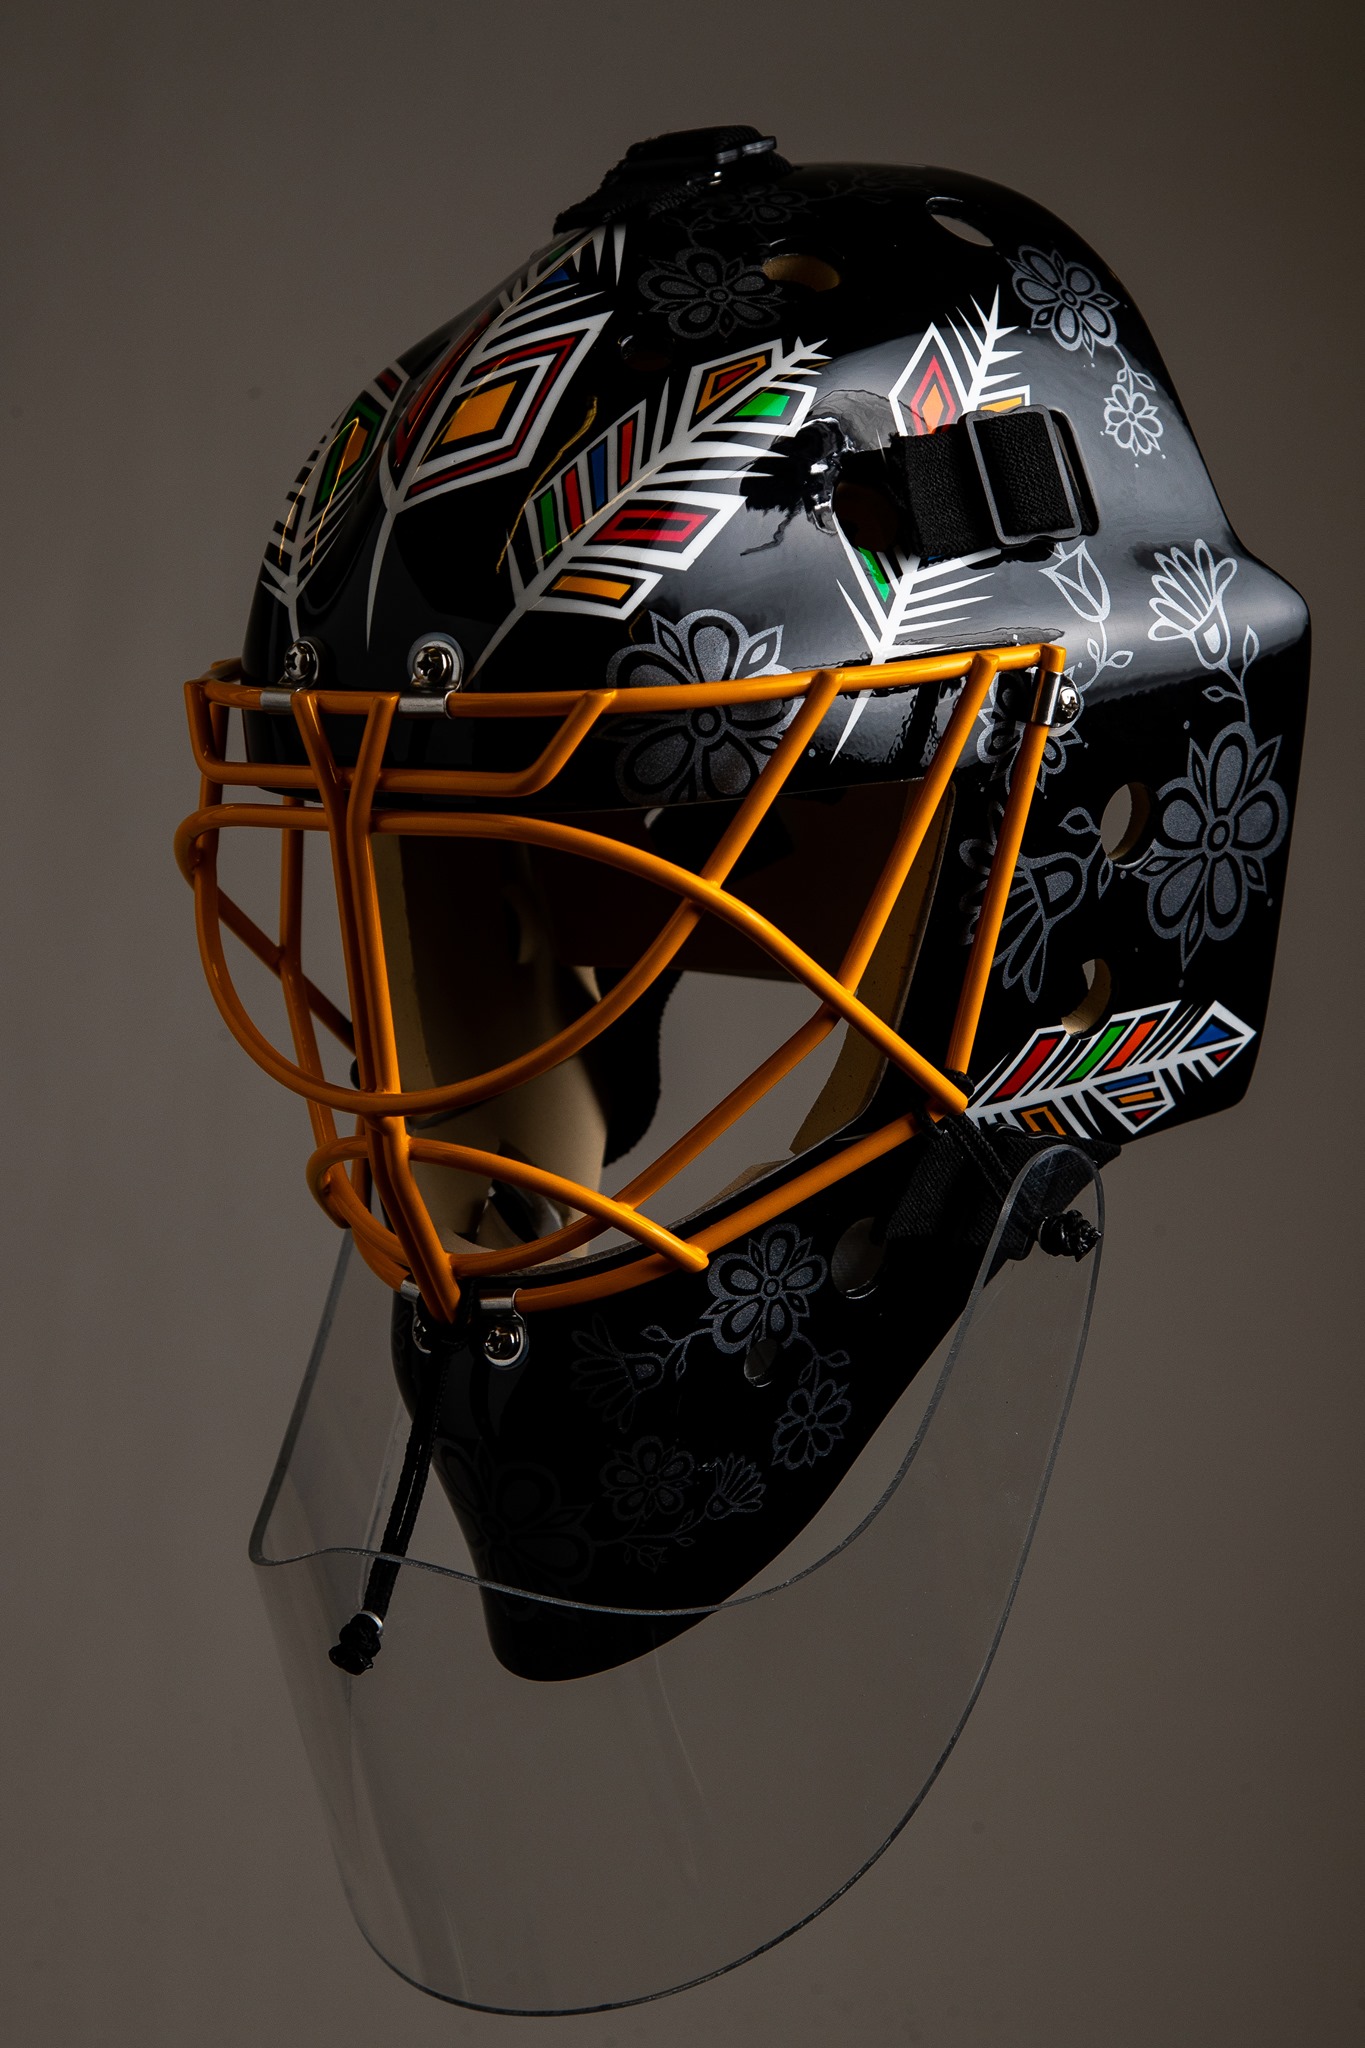 Goalie mask for Chicago's NHL team designed by Indigenous artist from Red  Lake, Ont.